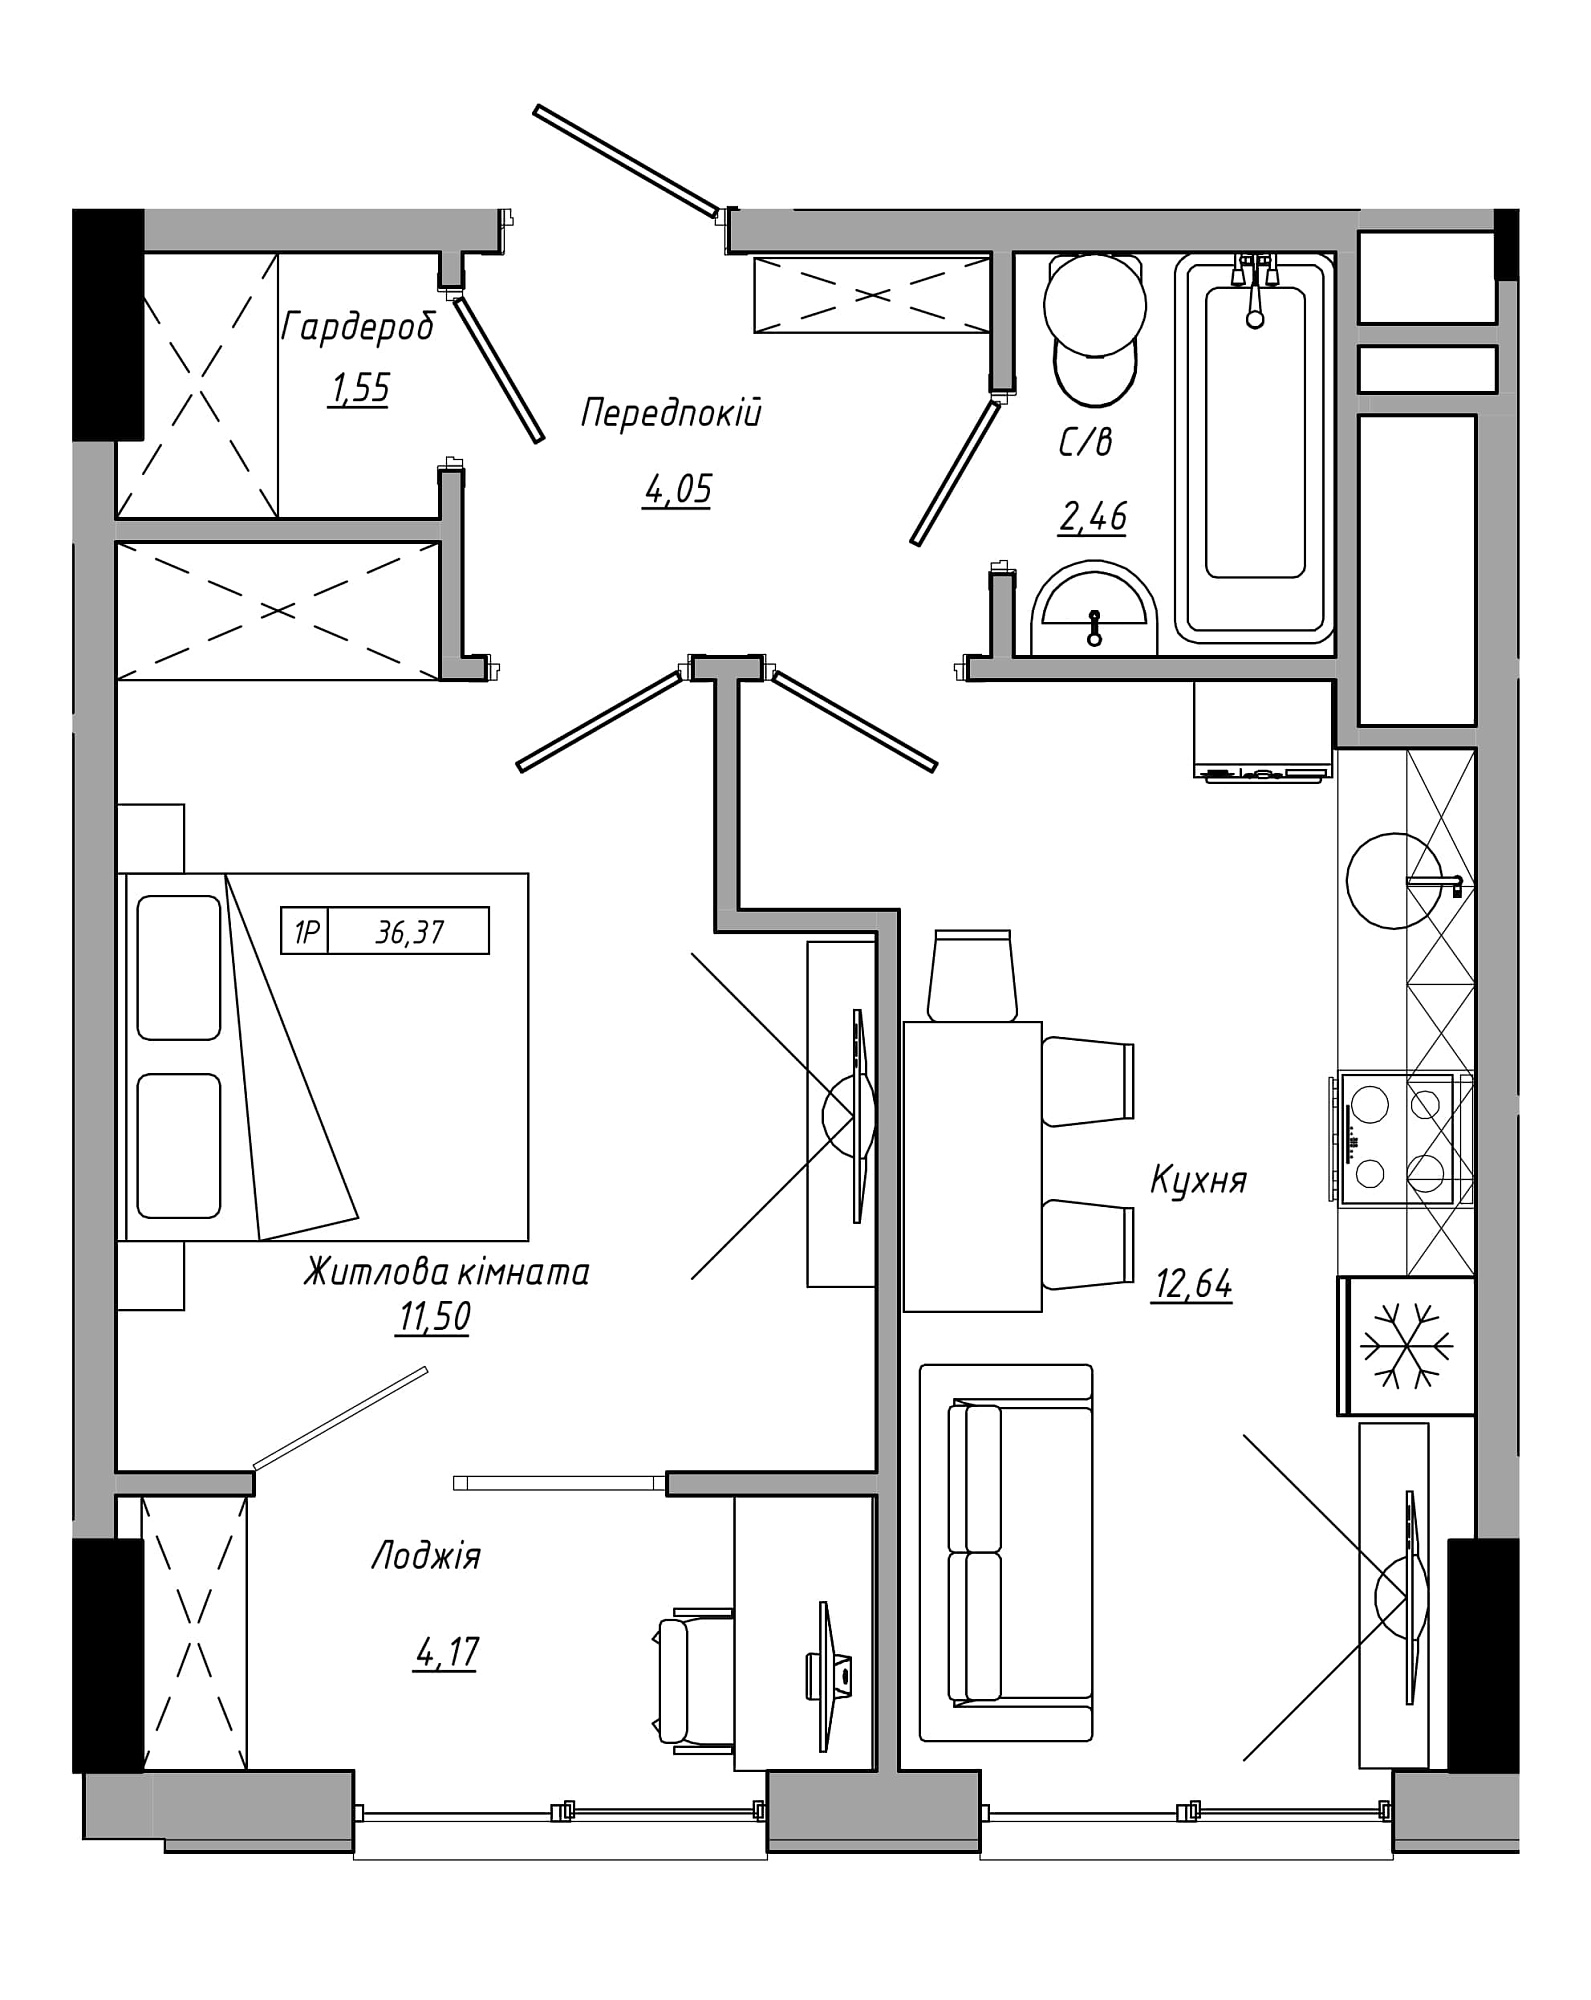 Planning 1-rm flats area 36.37m2, AB-21-13/00120.